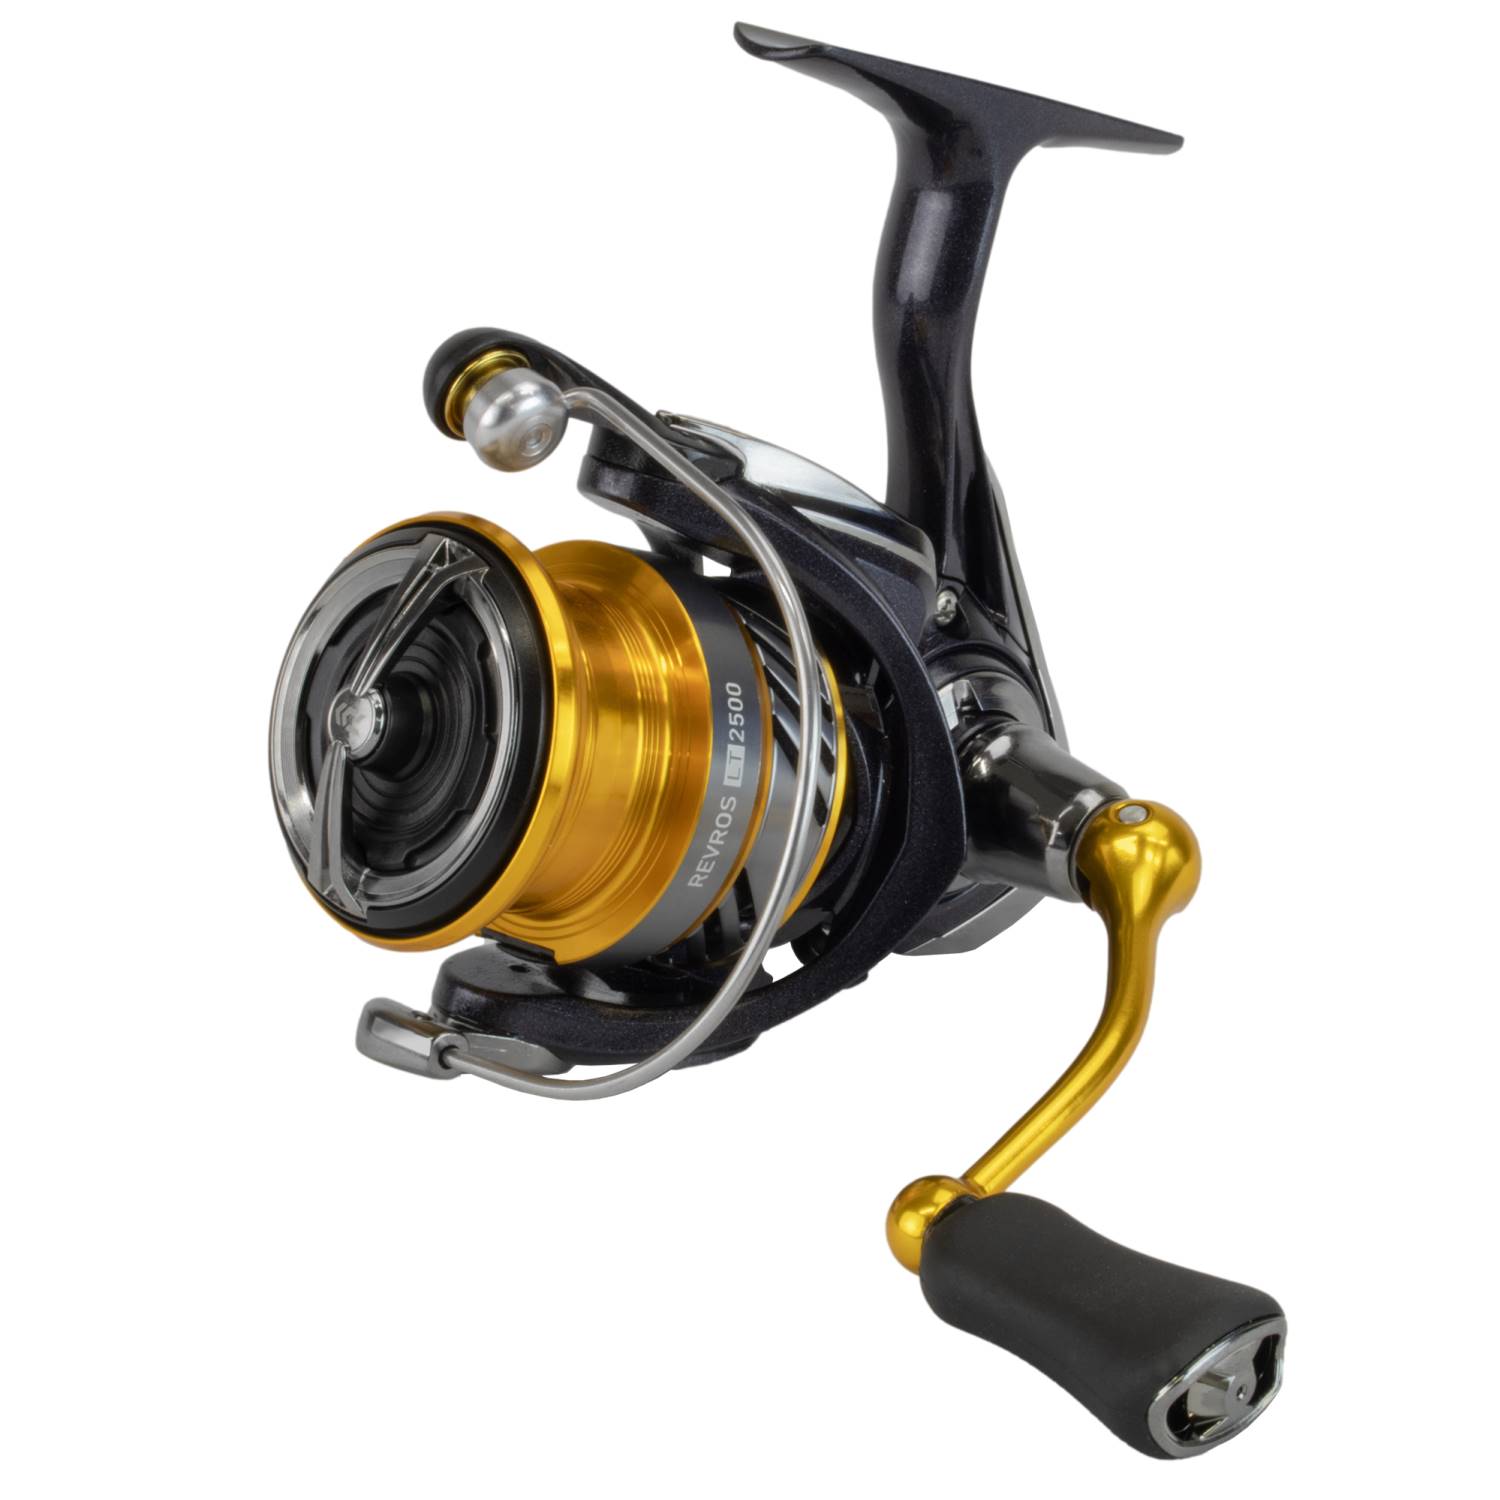 Daiwa REVROS MX 3500 Spinnrolle Frontbremsrolle Hechtrolle 